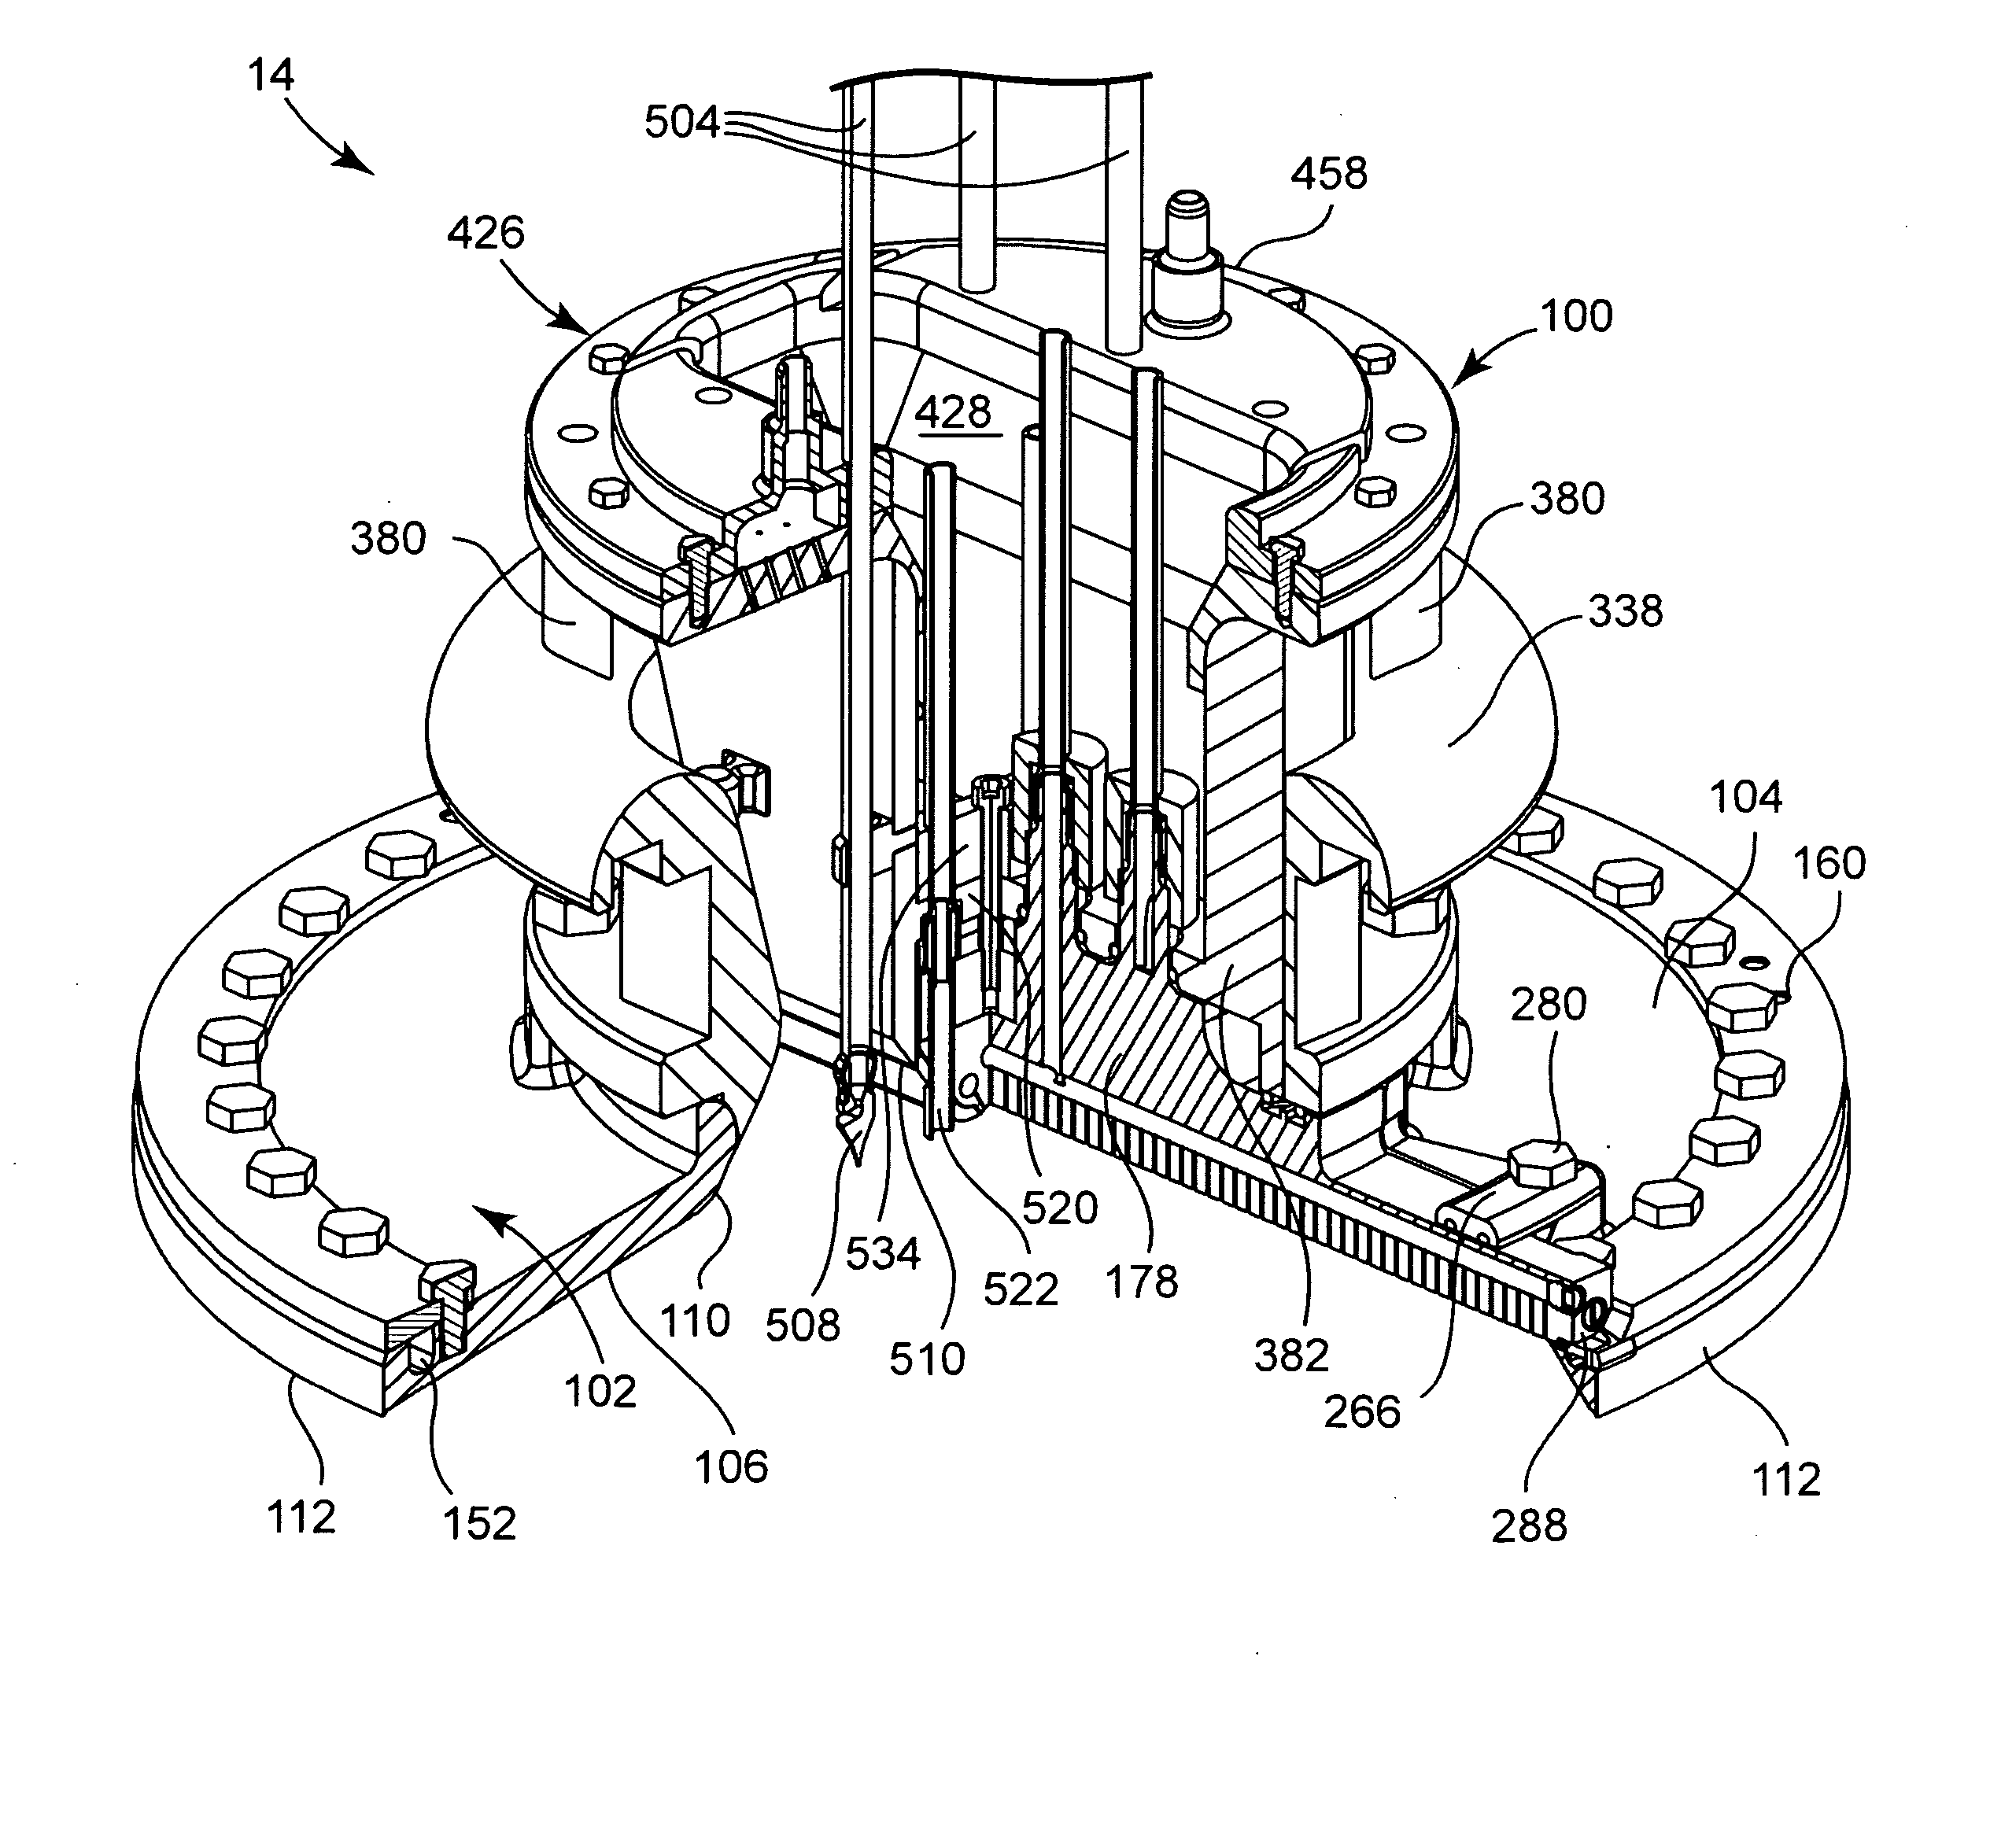 Barrier structure and nozzle device for use in tools used to process microelectronic workpieces with one or more treatment fluids